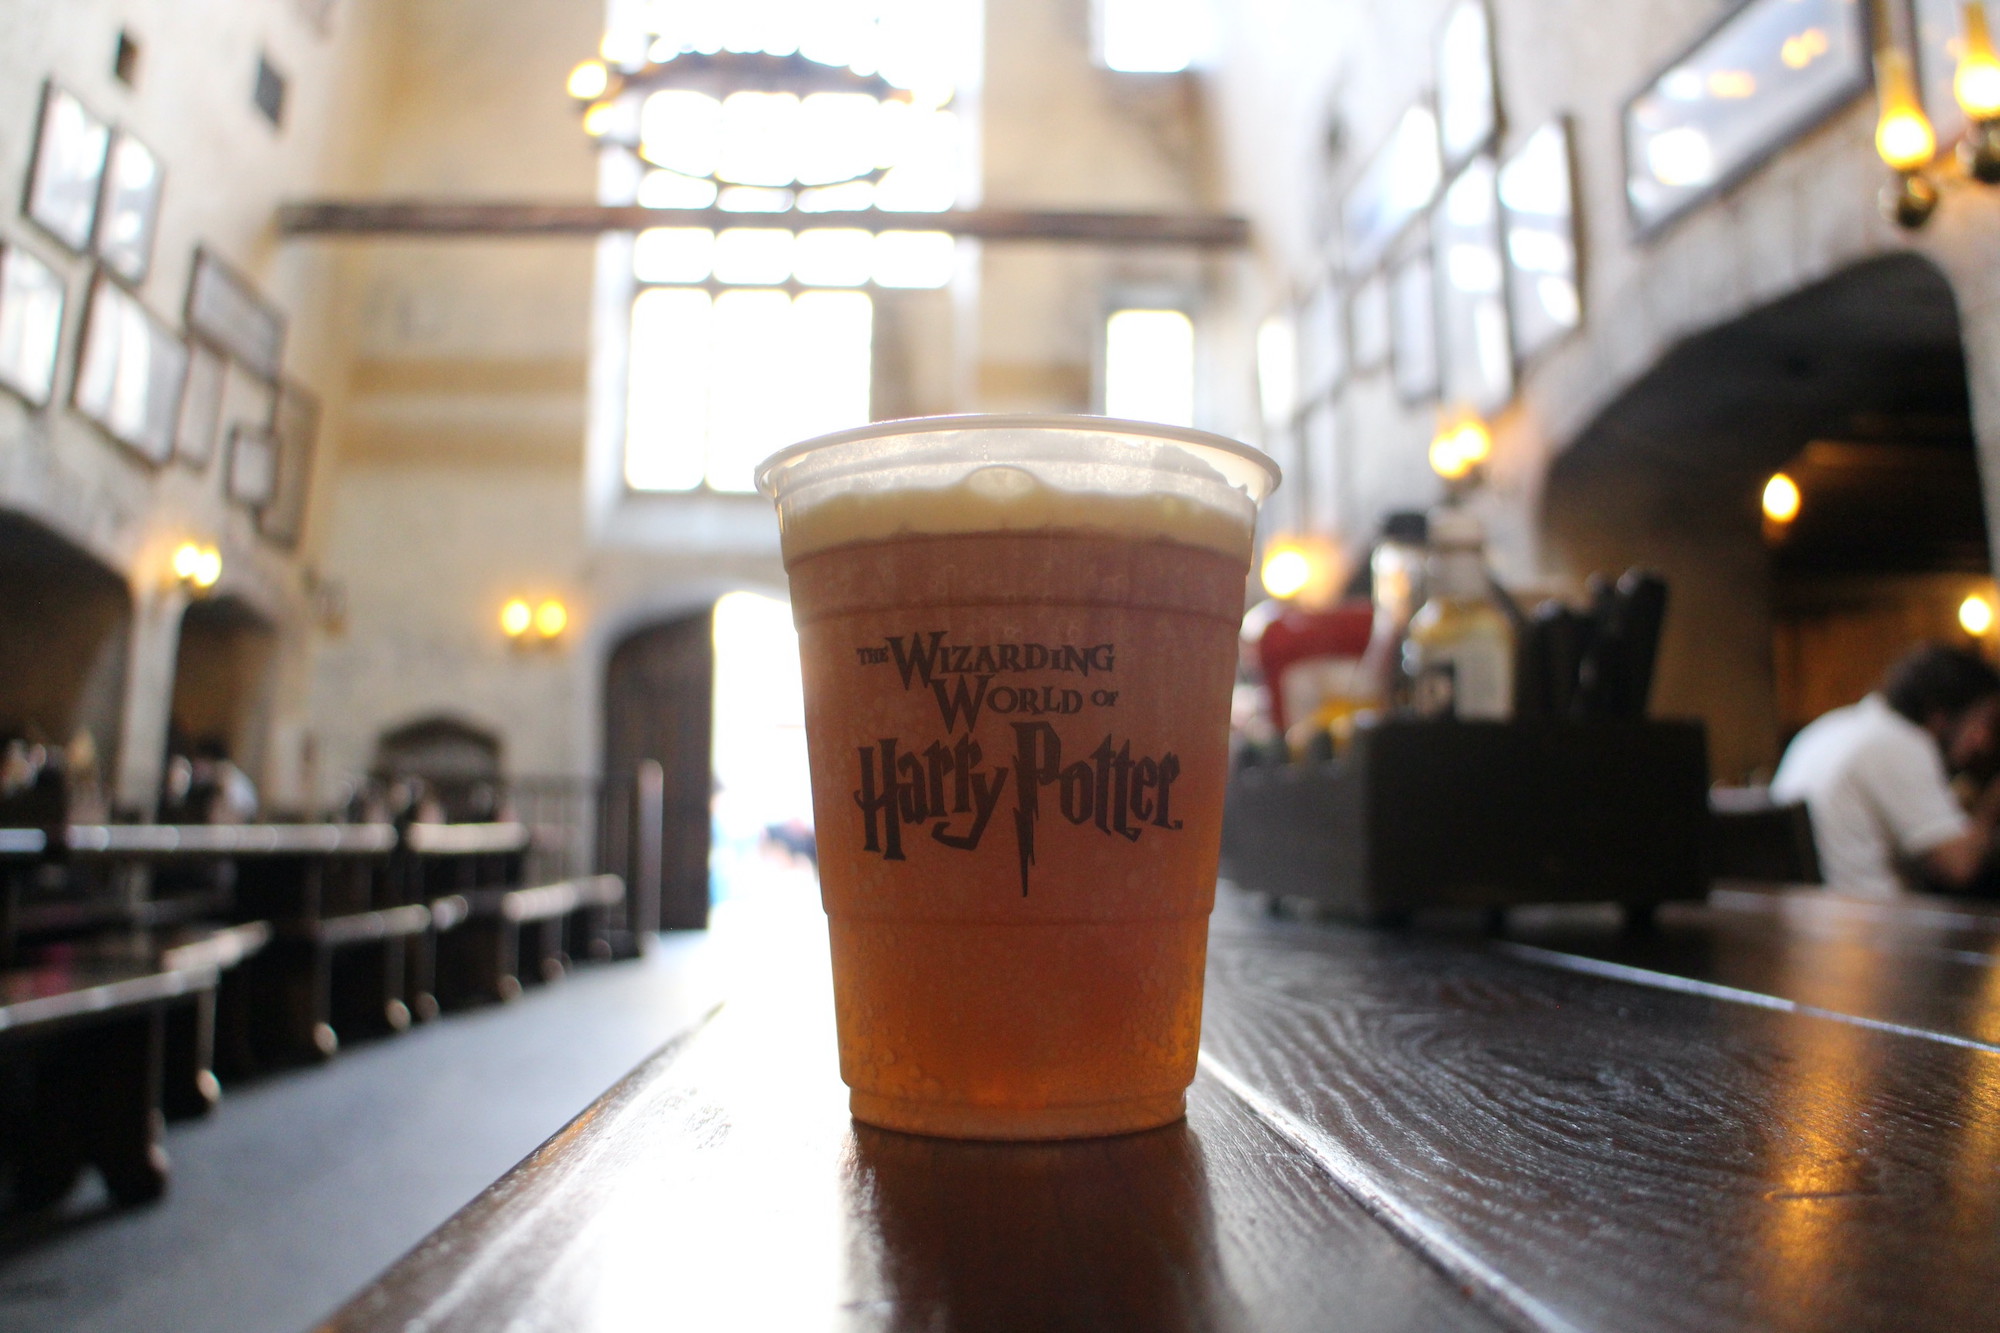 This butterbeer sits on a dark table in The Leaky Cauldron table restaurant, backlit by tall windows and is more accessible with Orlando deals